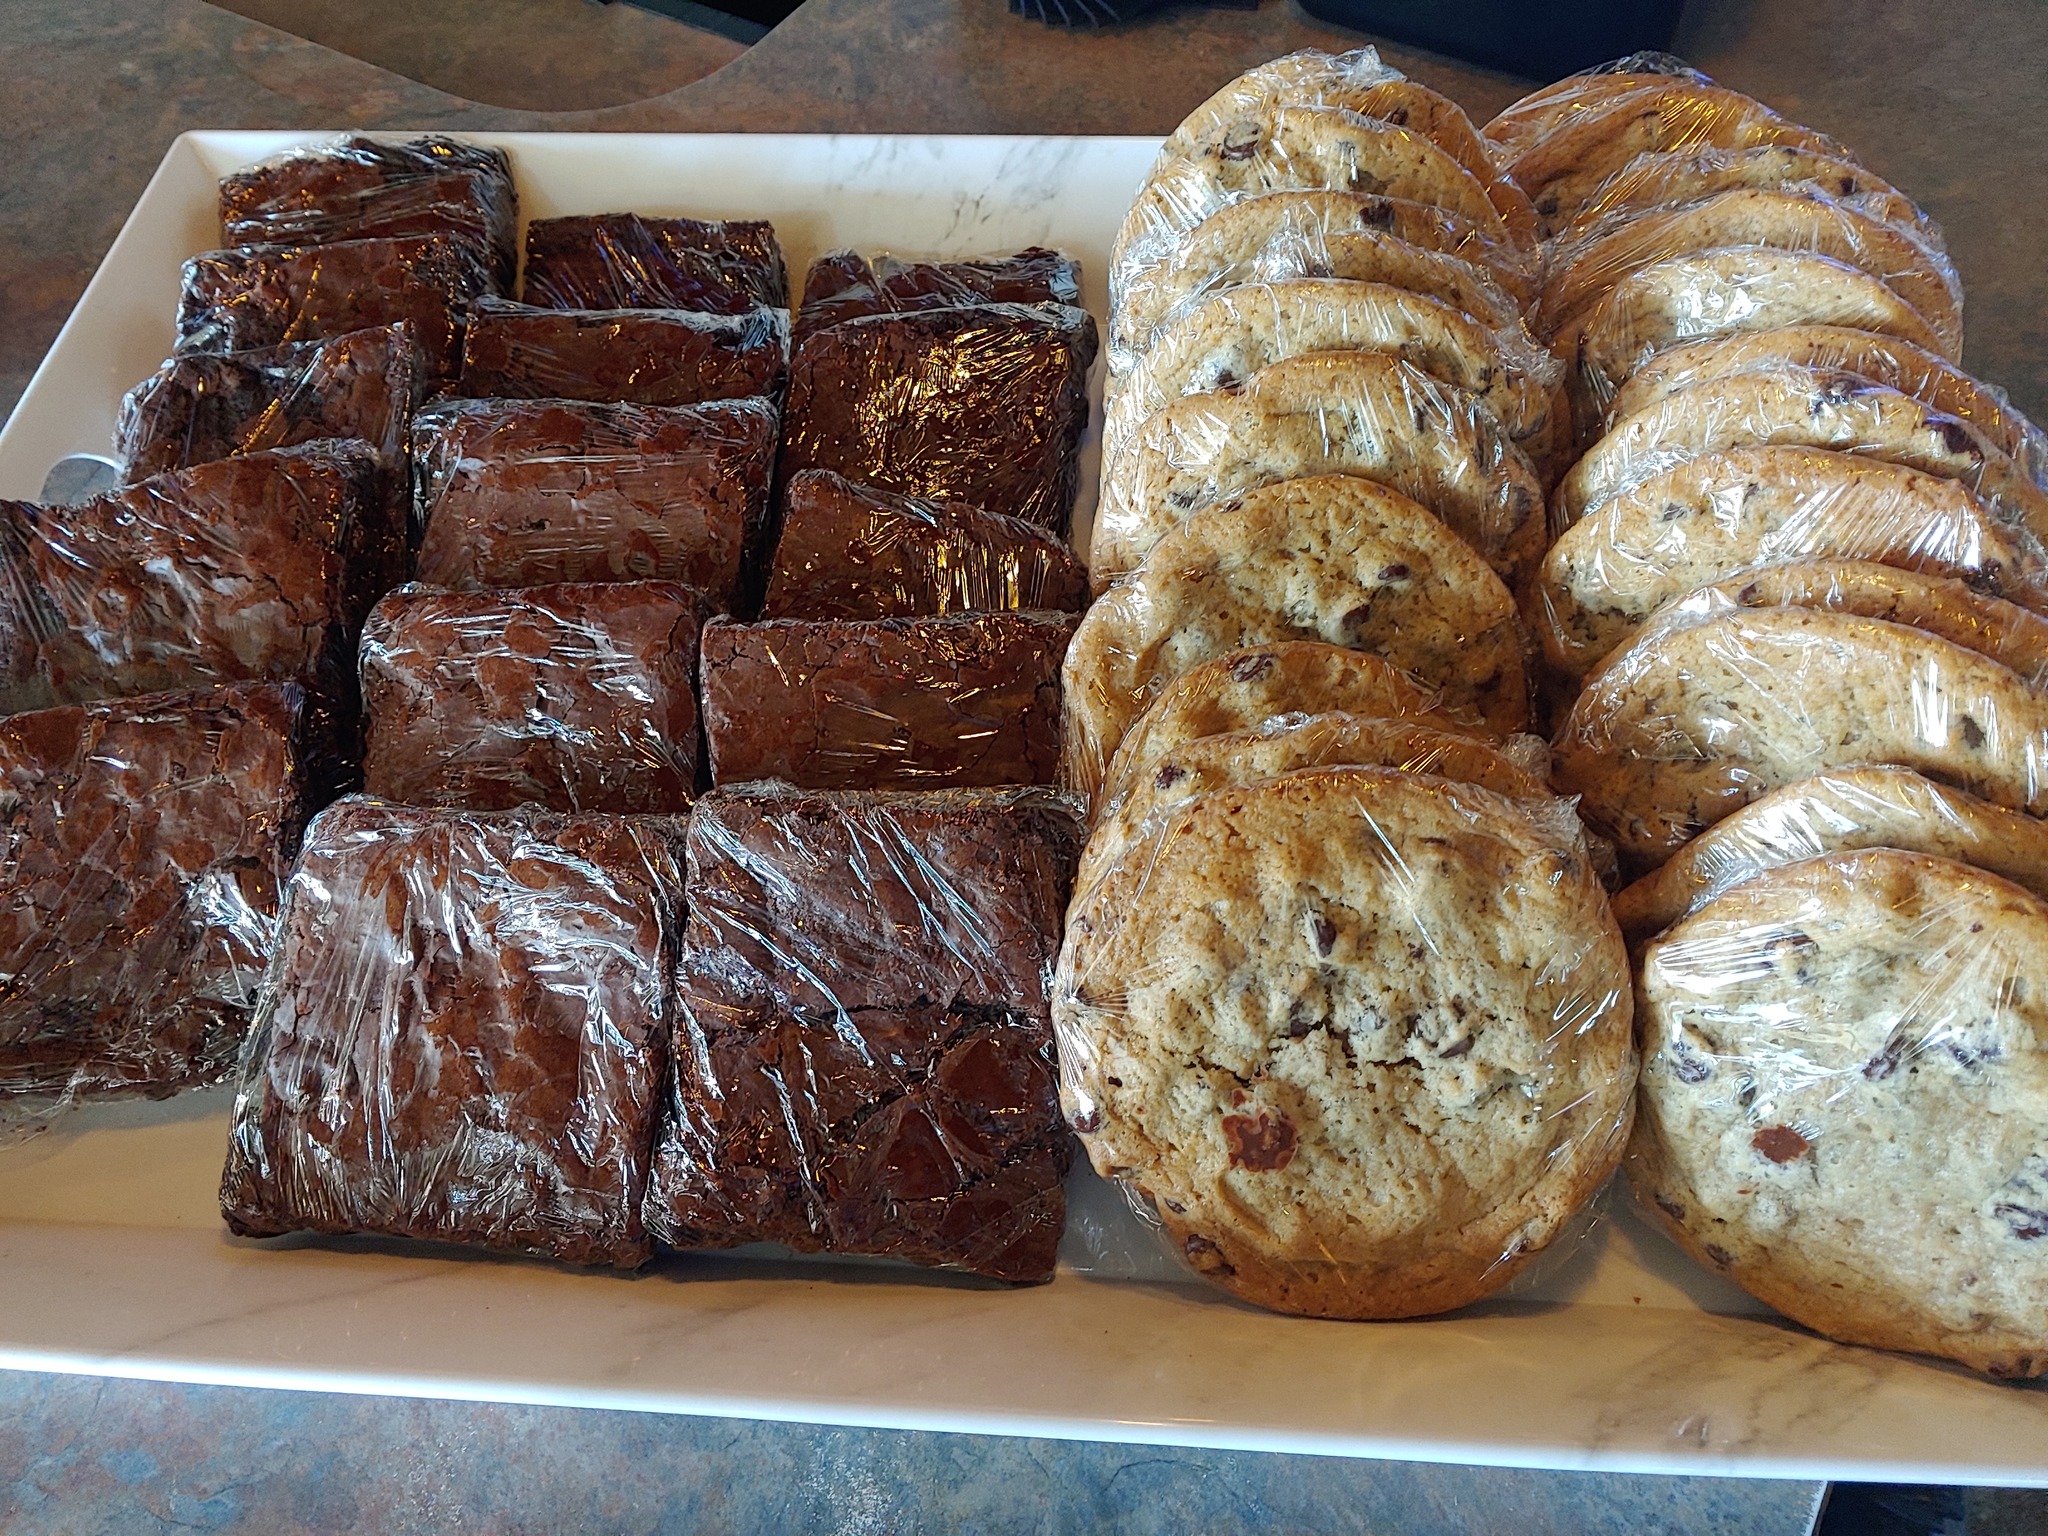 Fore the love of sweets! 🍪💕 Whether you're here for the golf or just the views, enhance your experience at The Klub Ruby View with our brownies and cookies!

📍 2100 Ruby View Dr, Elko, NV 89801

#rubyviewgolfclub #elkogolf #KlubVibes